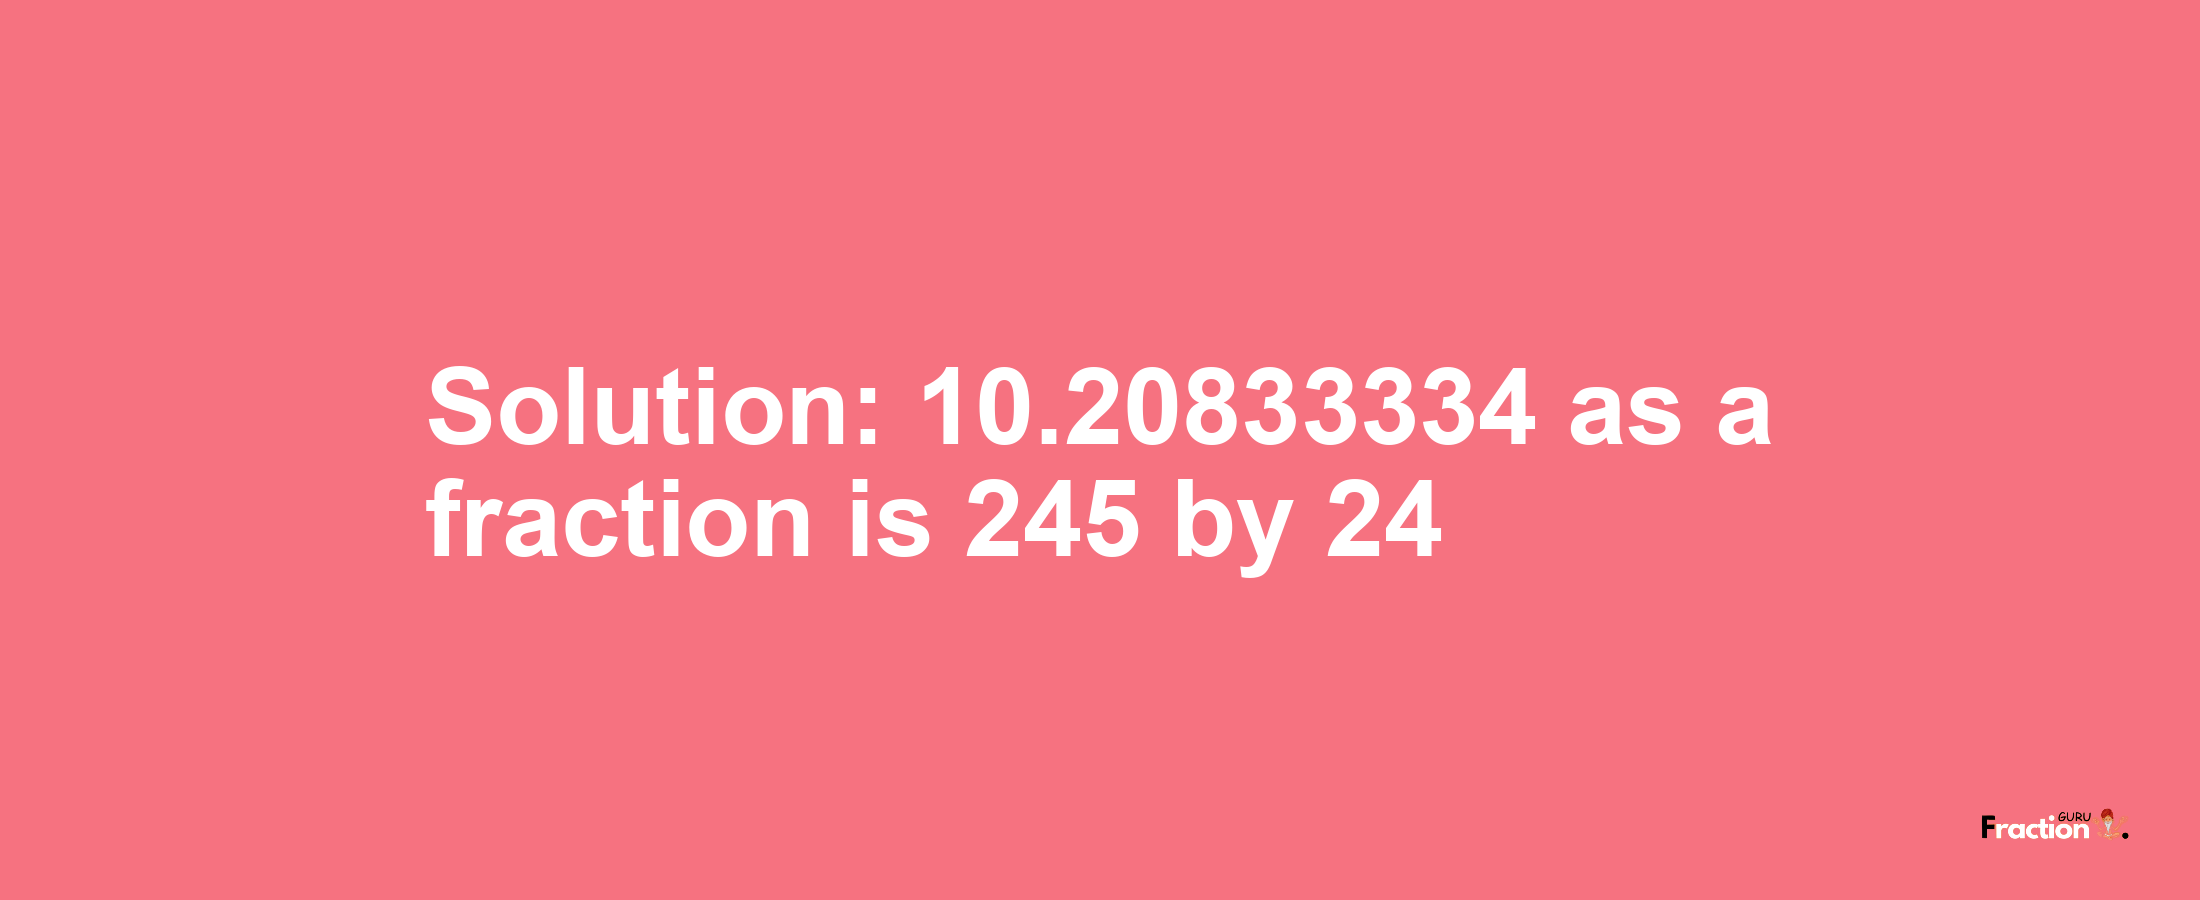 Solution:10.20833334 as a fraction is 245/24